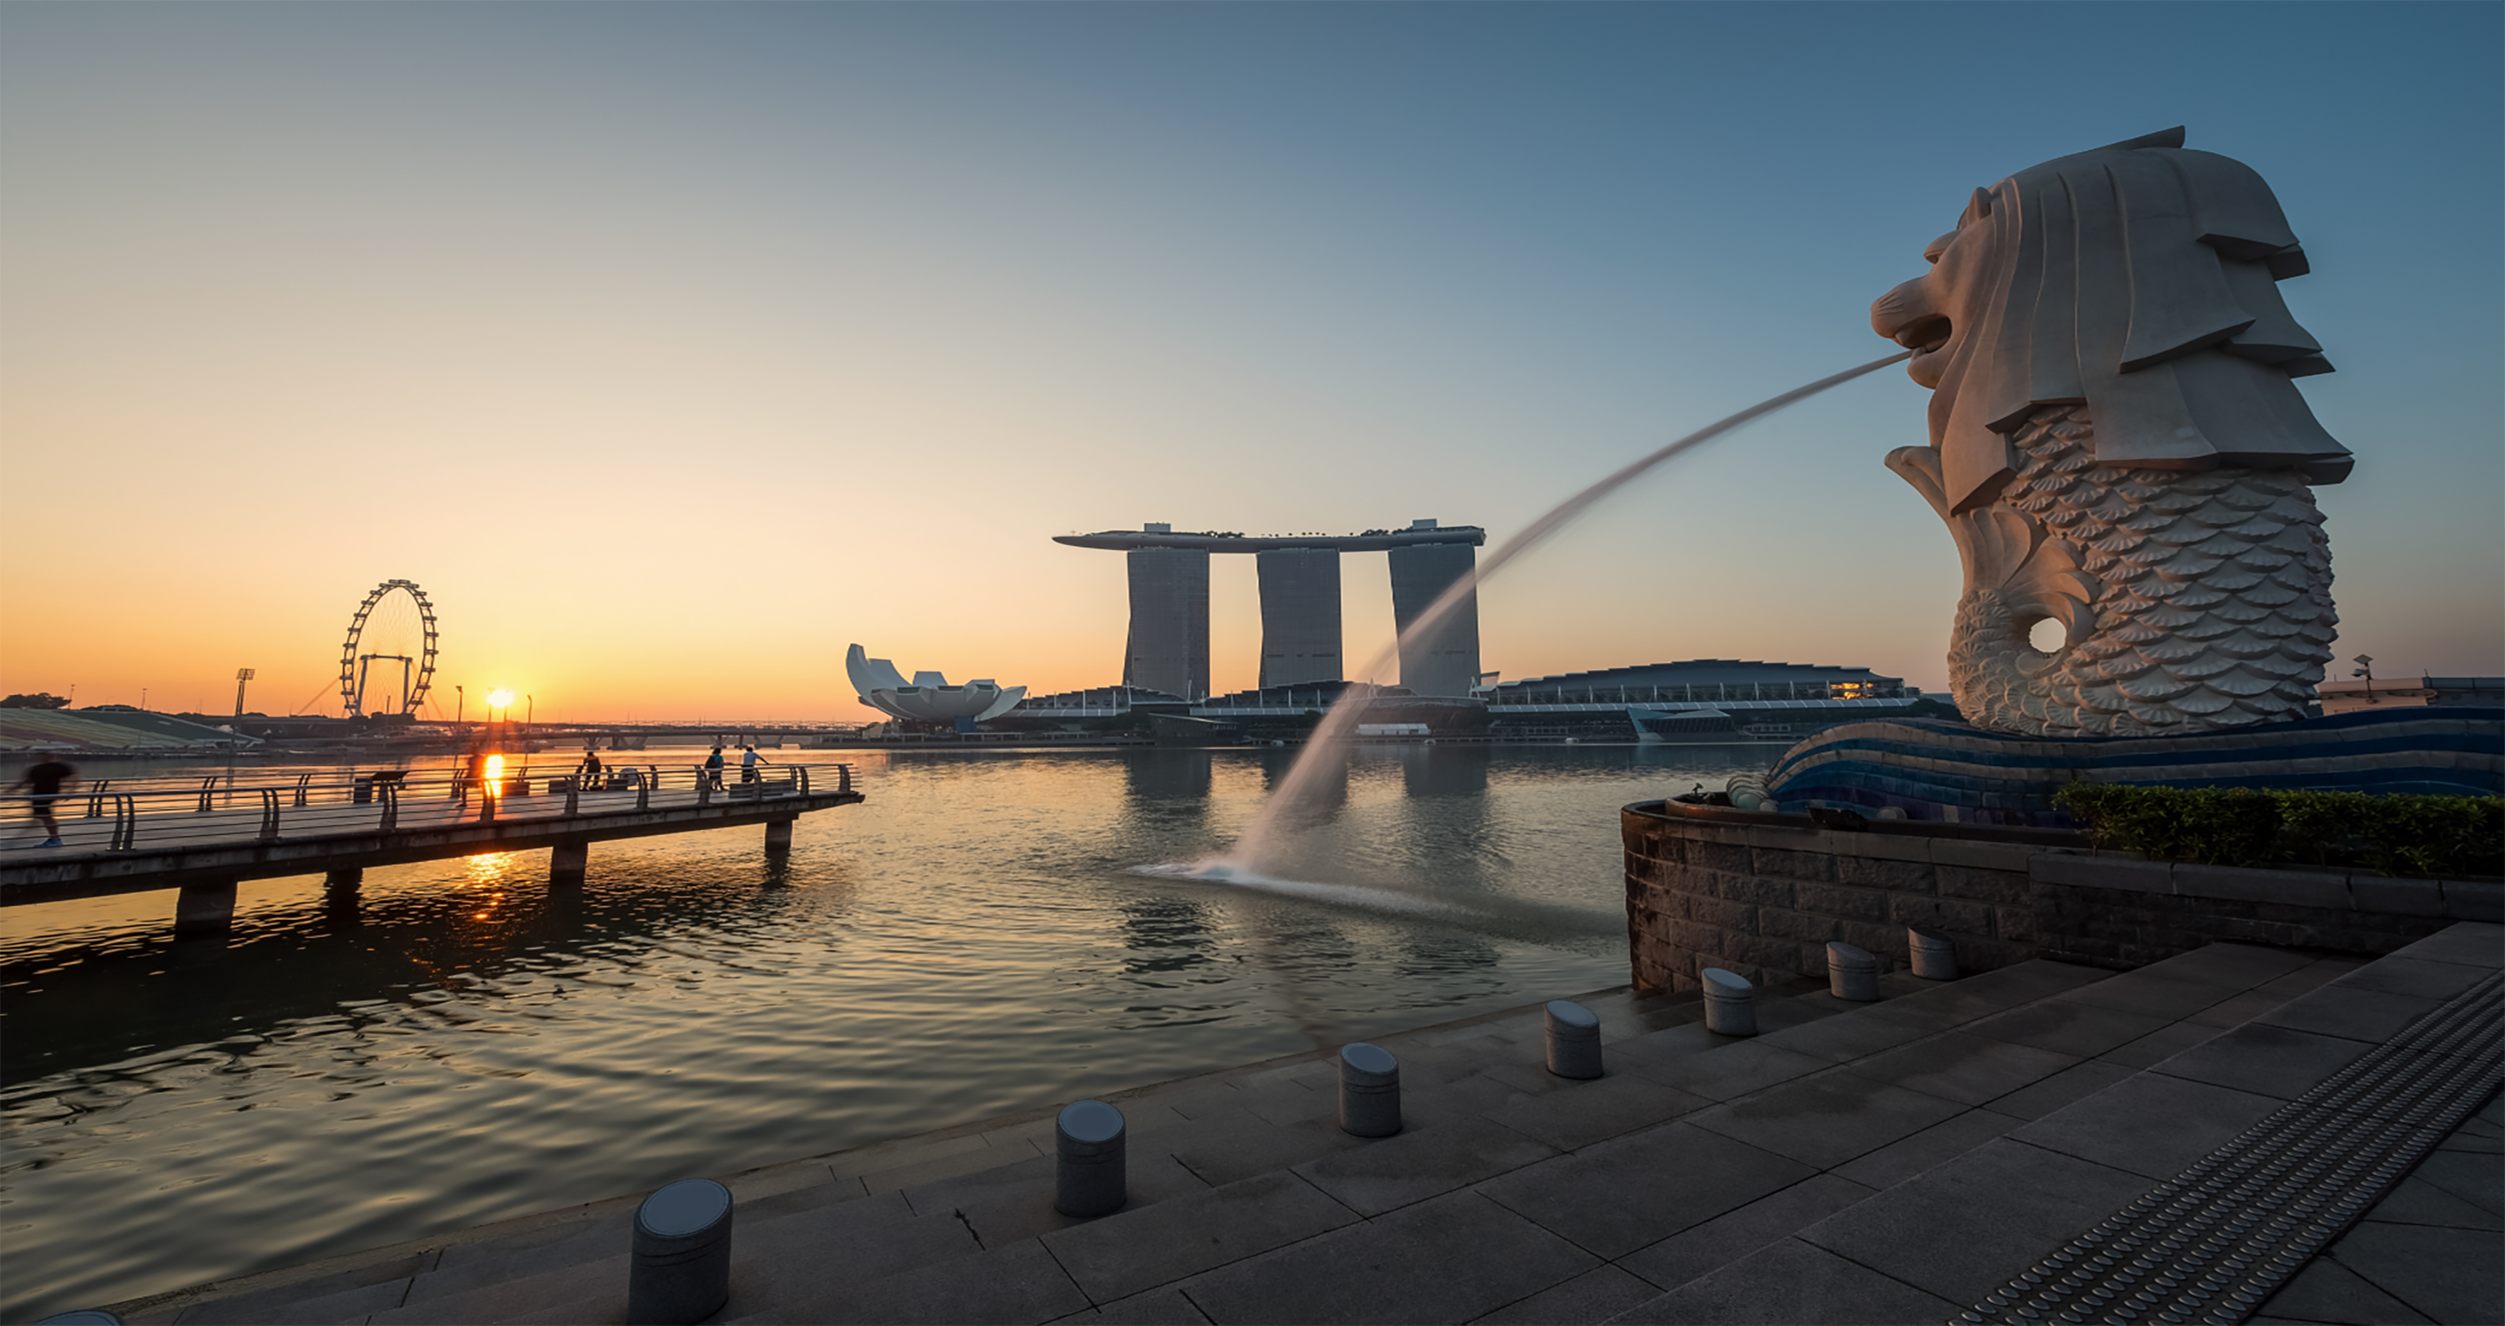 Image of Singapore Bay with Lion Fountain, hotel and Ferris wheel